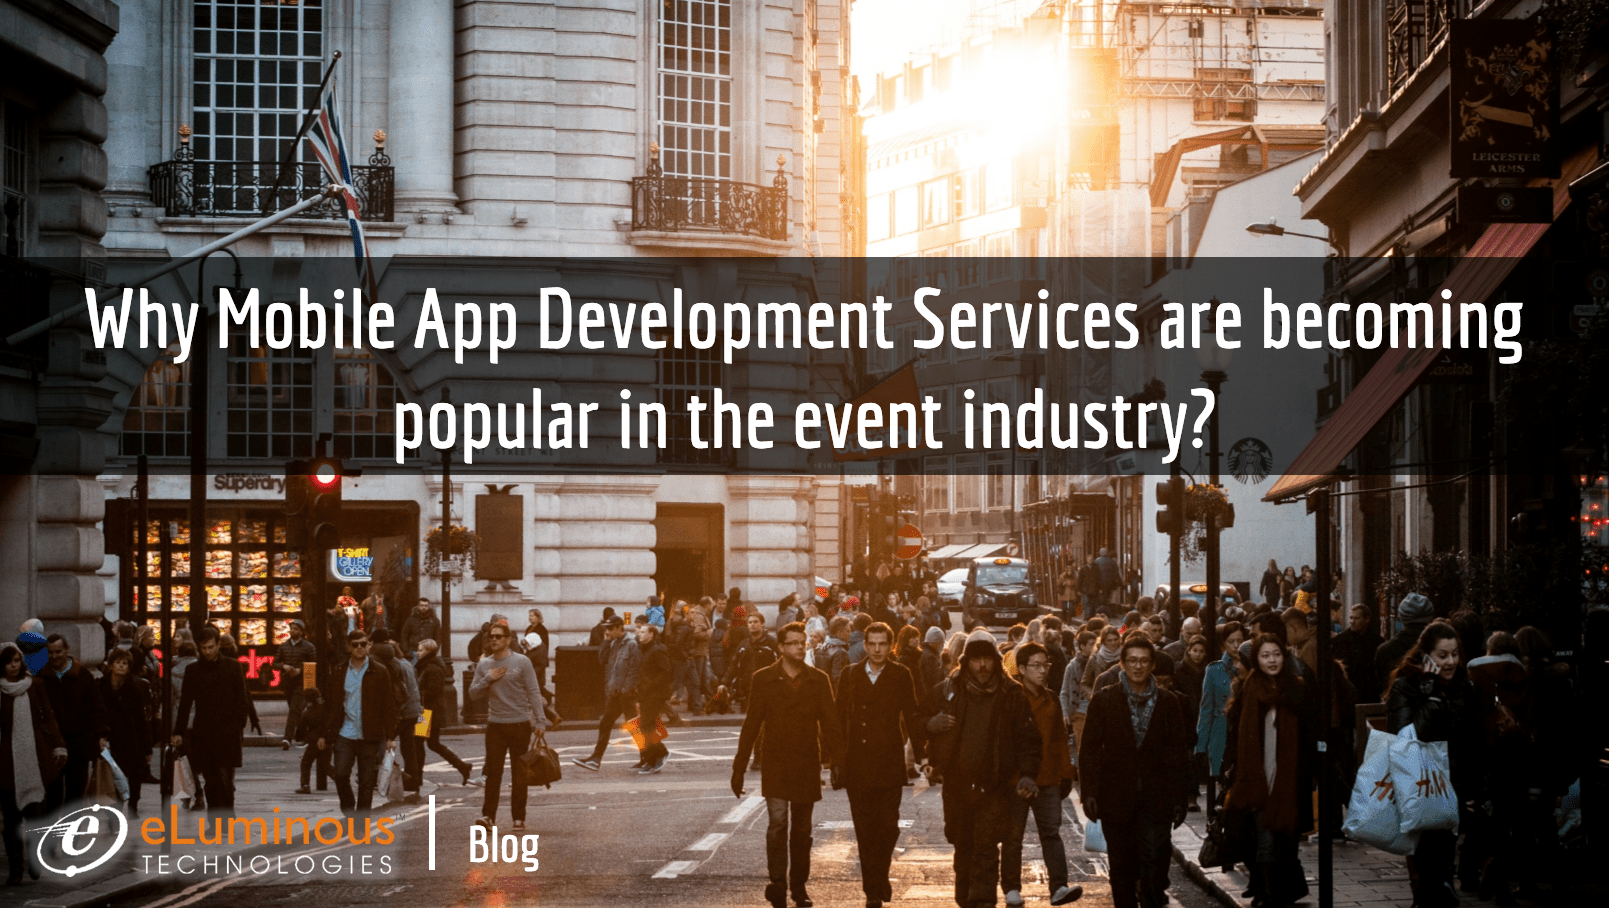 Why Mobile Apps Development services are becoming popular in the event industry?